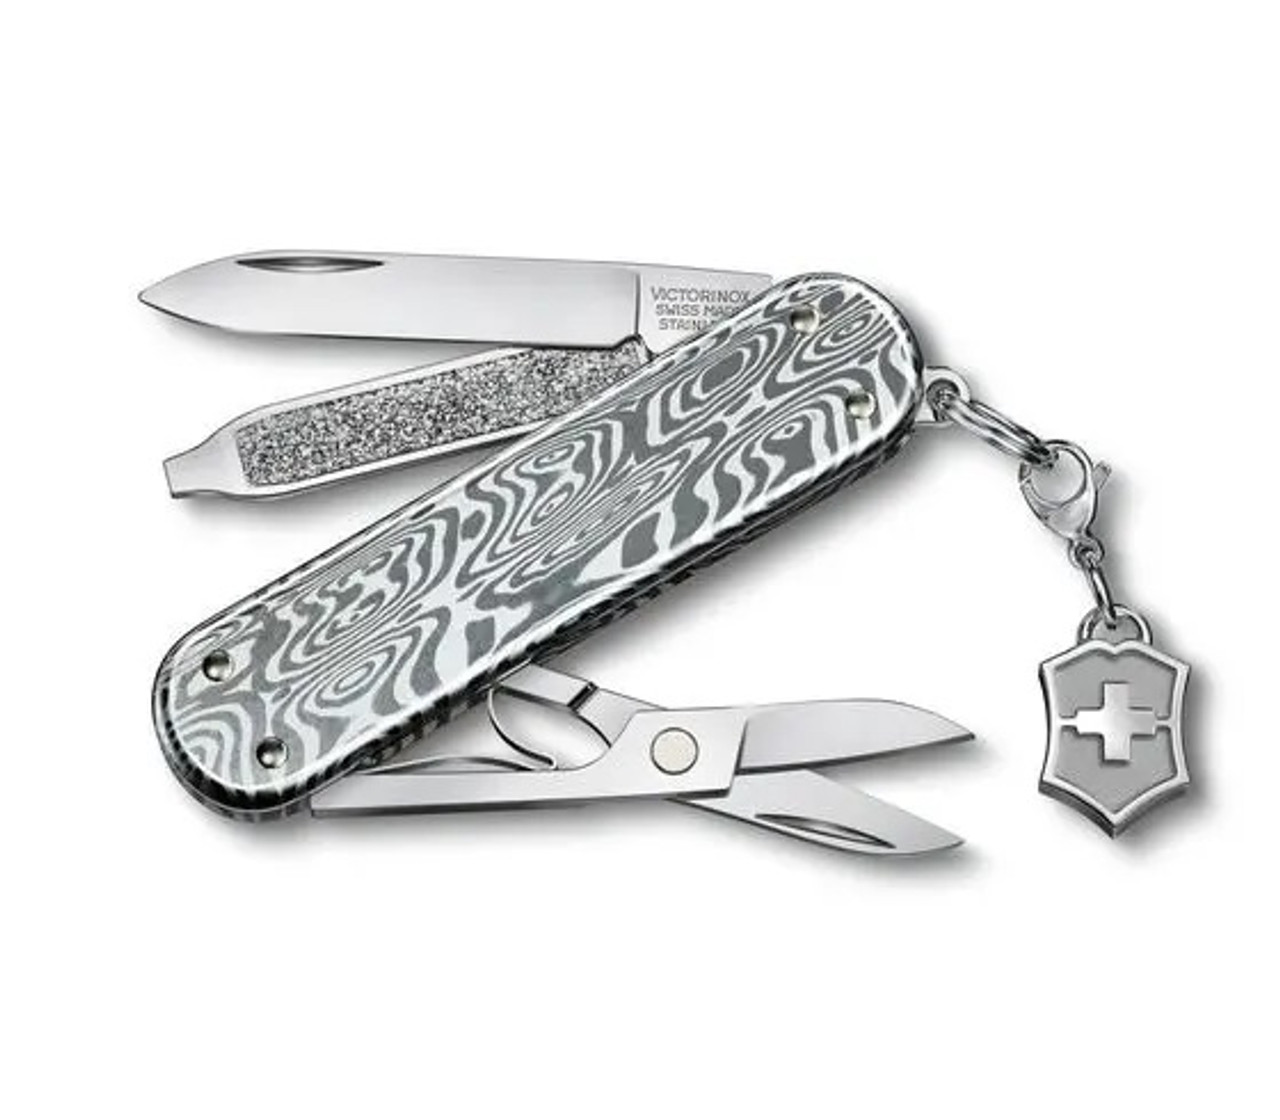 Nailfile (58-mm) without SD – LeaF's Victorinox knives collection